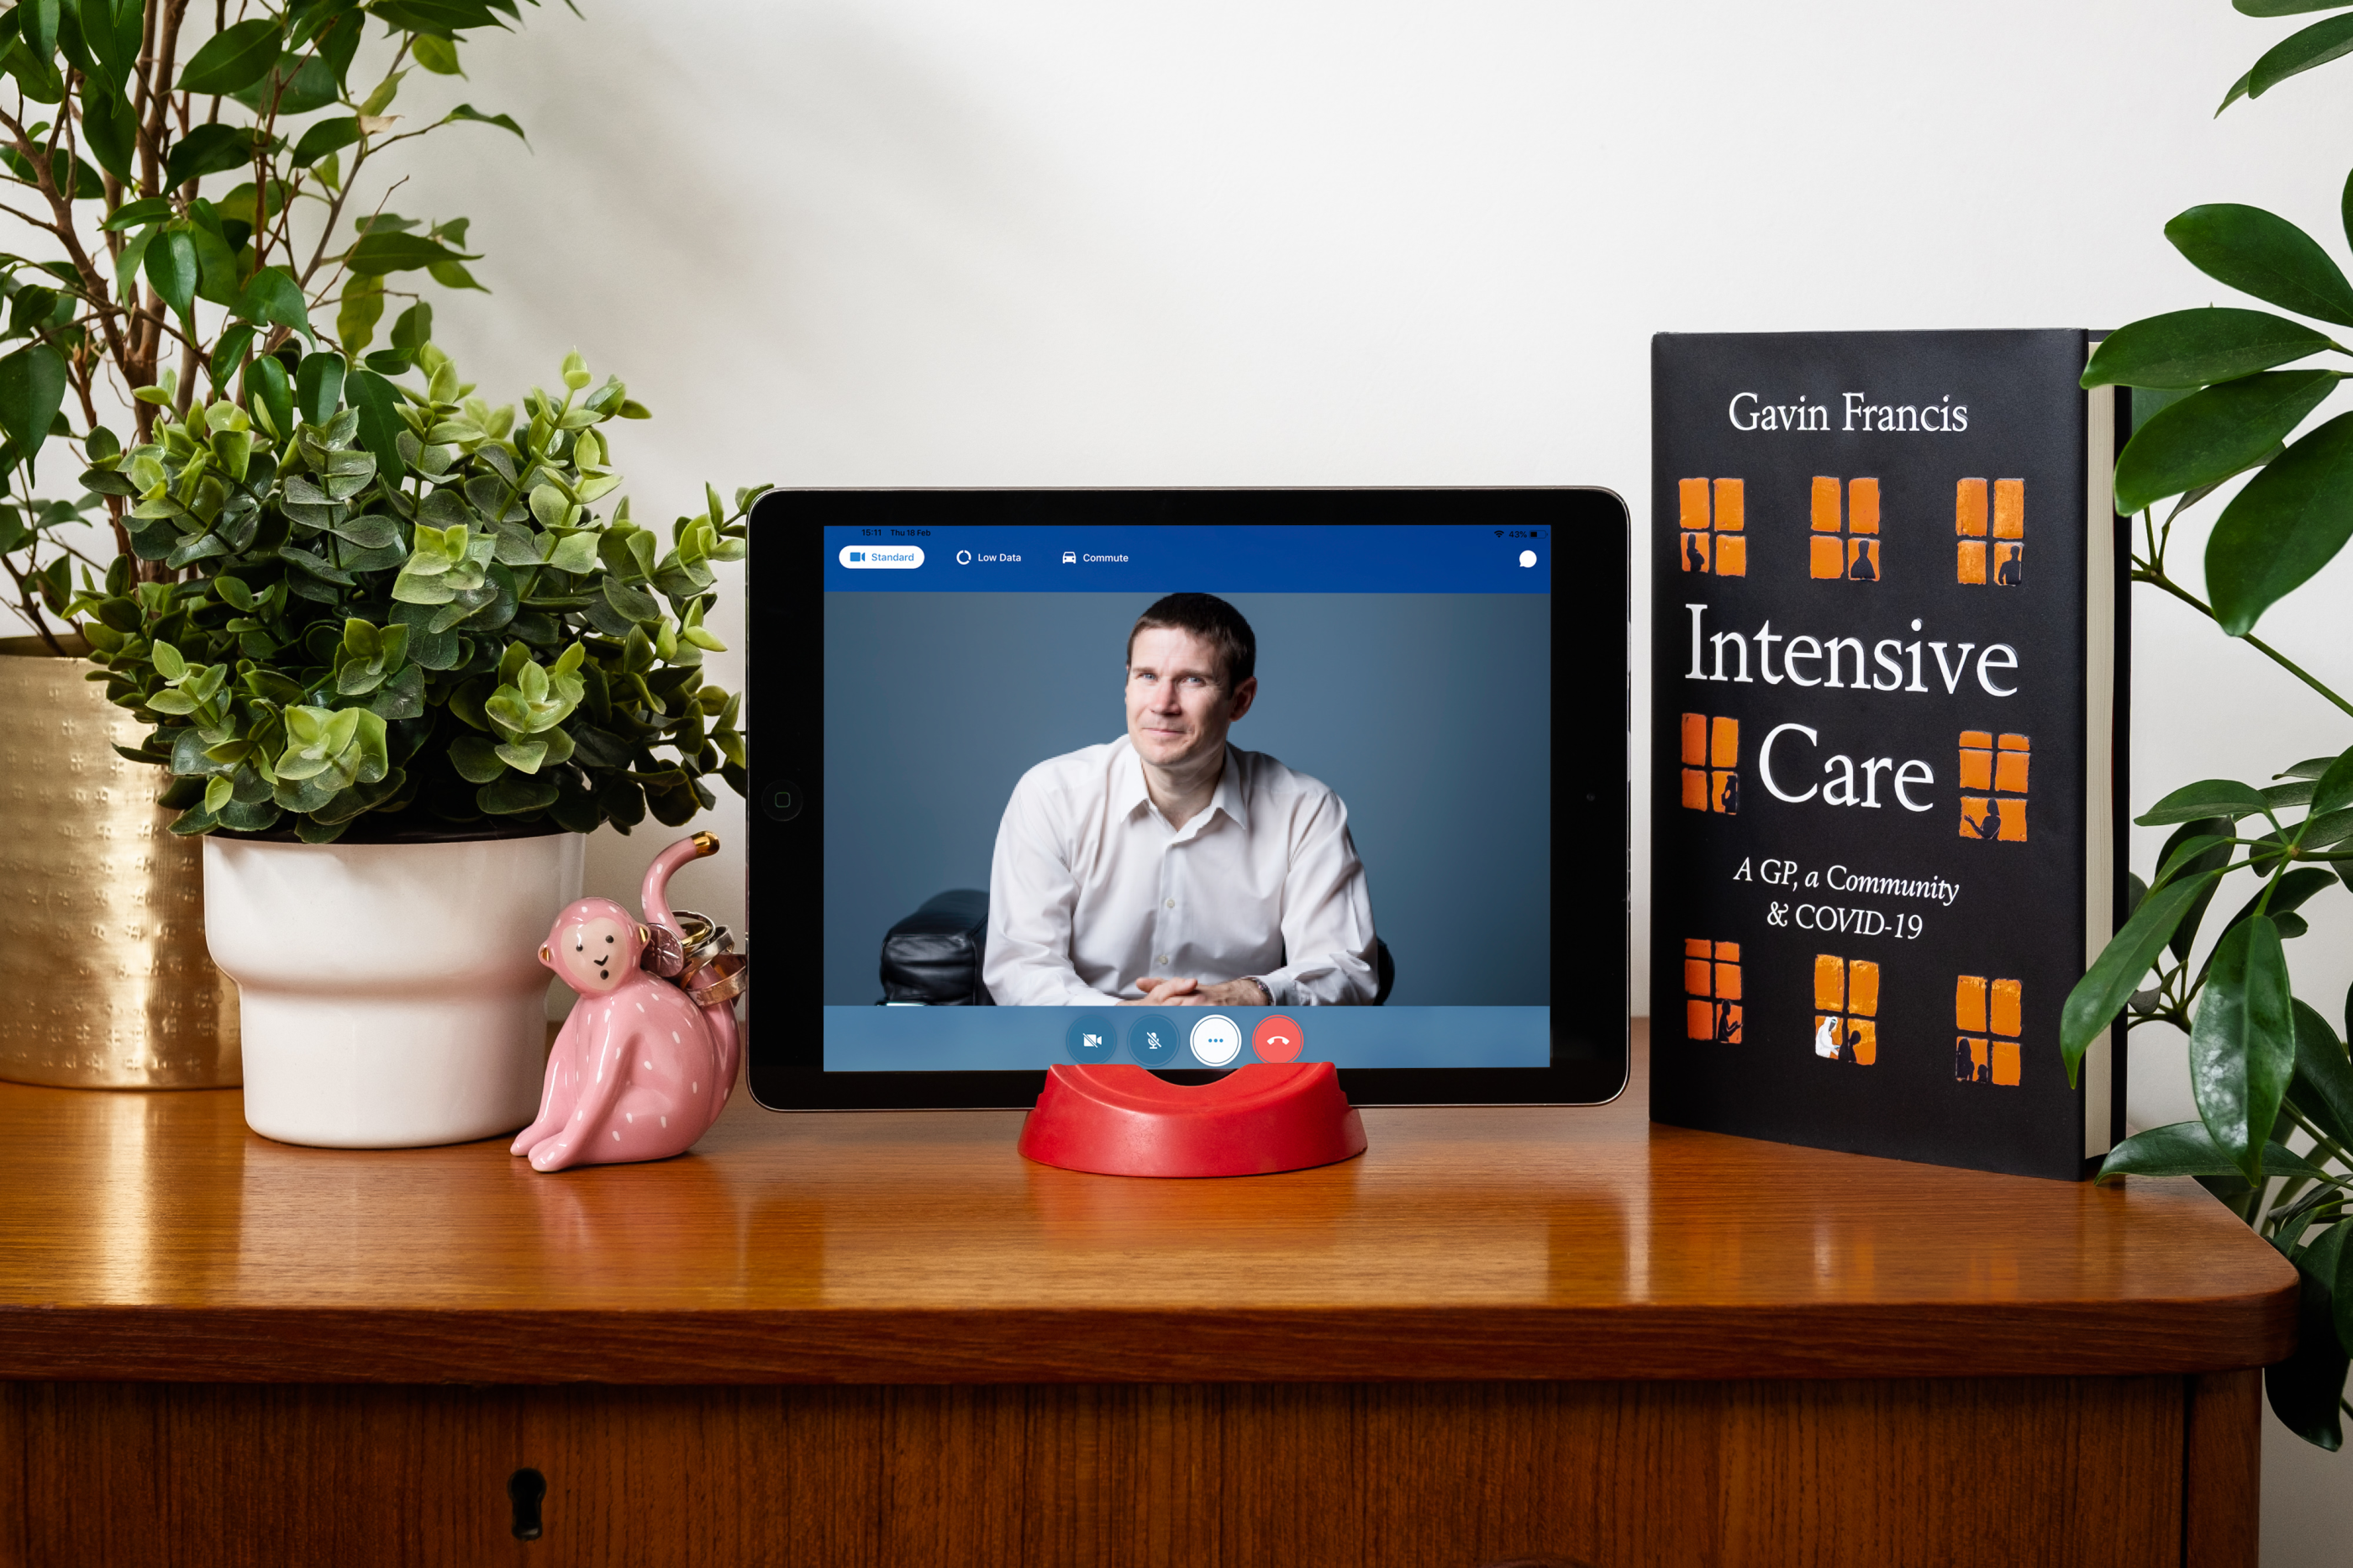 An image of tablet computer which displays Dr Gavin Francis seated in a chair. His Intensive Care book is stood upright next to the tablet surrounded by a pink toy monkey and few plants.